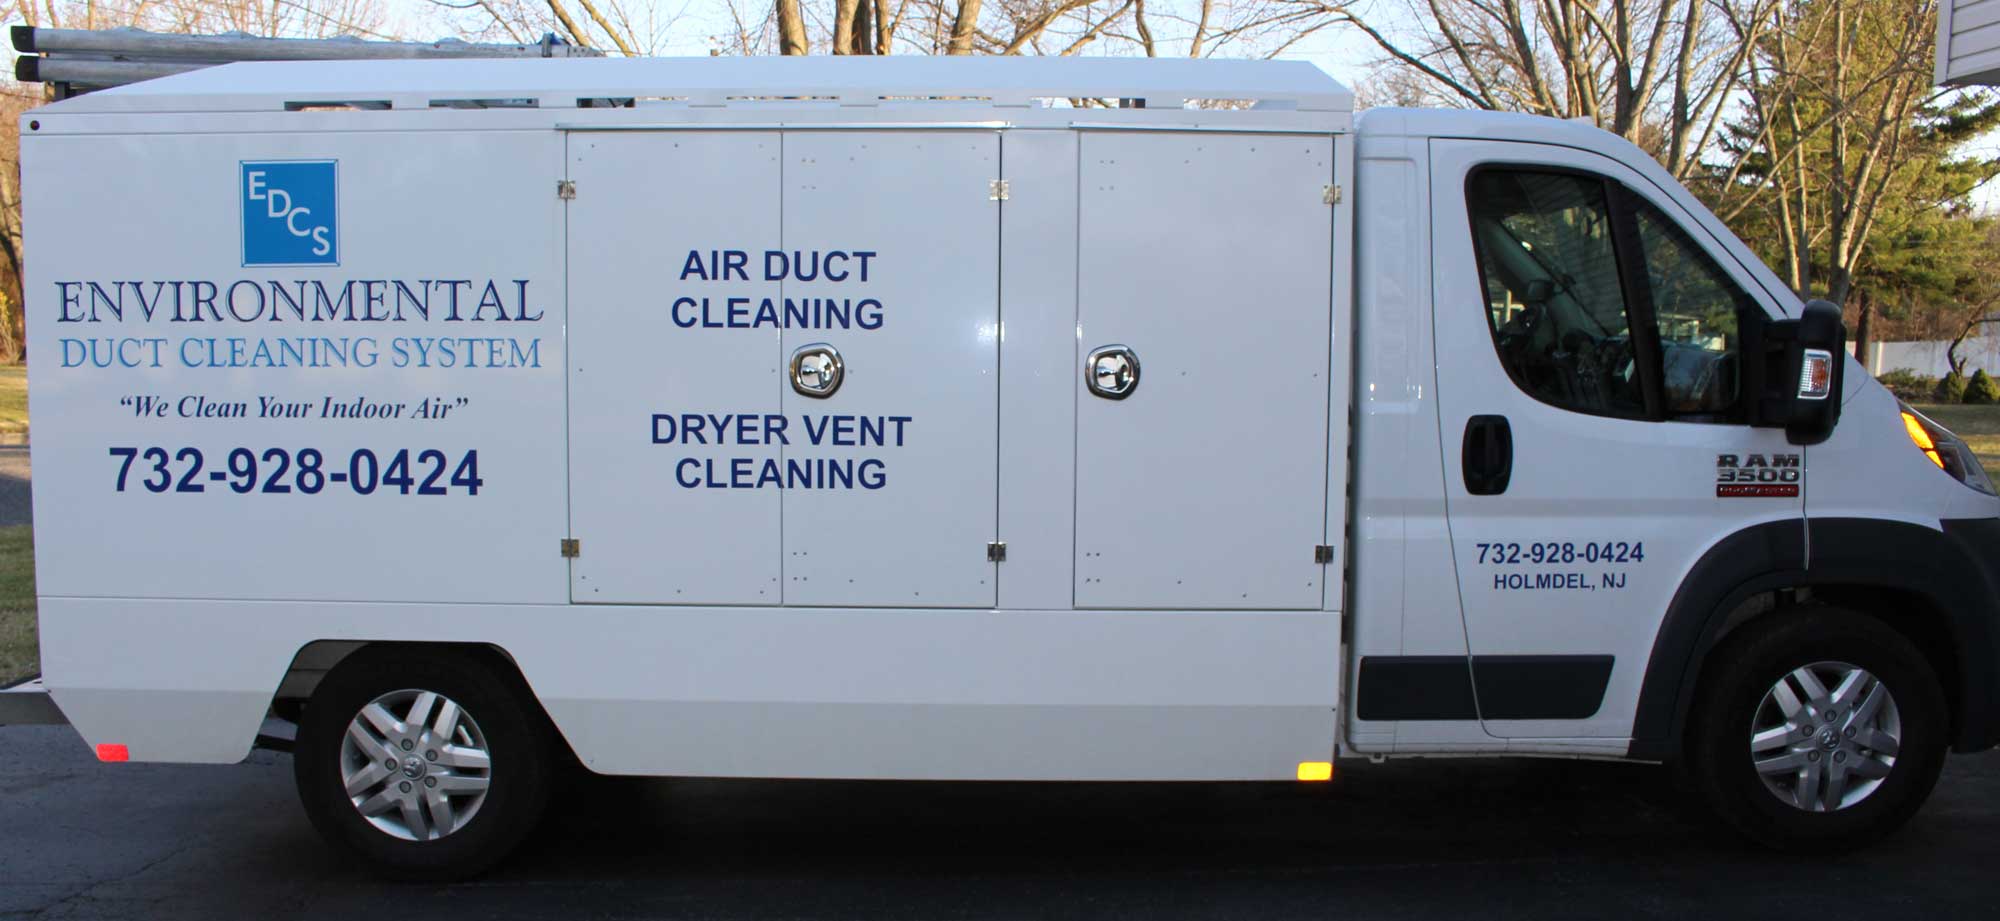 Environmental Duct Cleaning Services Truck